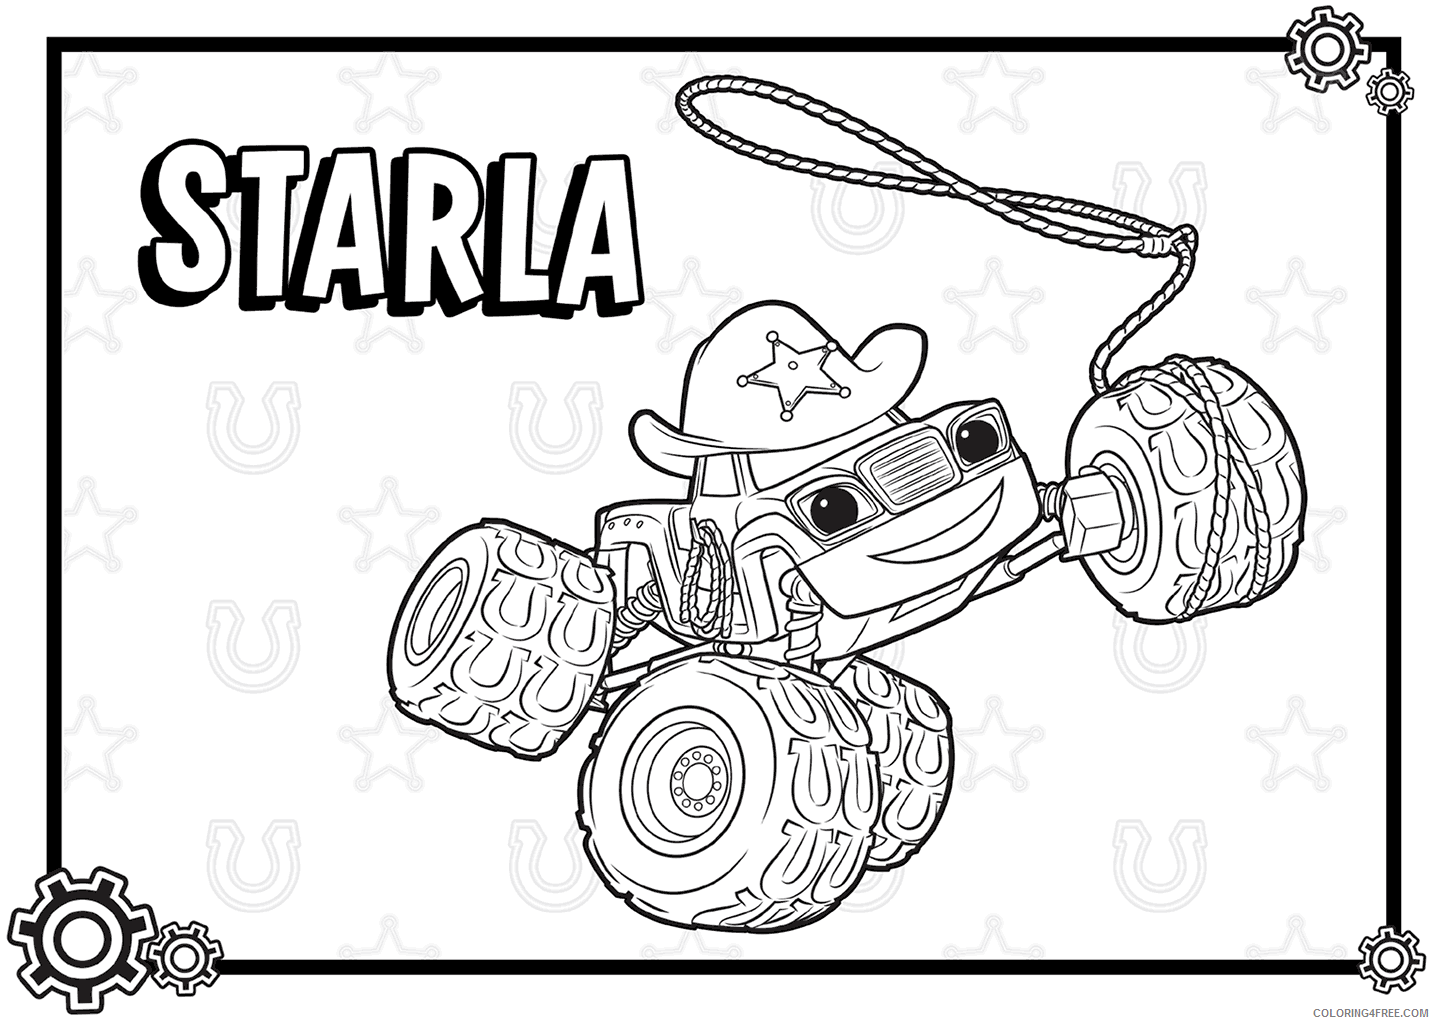 Blaze and the Monster Machines Coloring Pages TV Film Starla Printable 2020 00862 Coloring4free